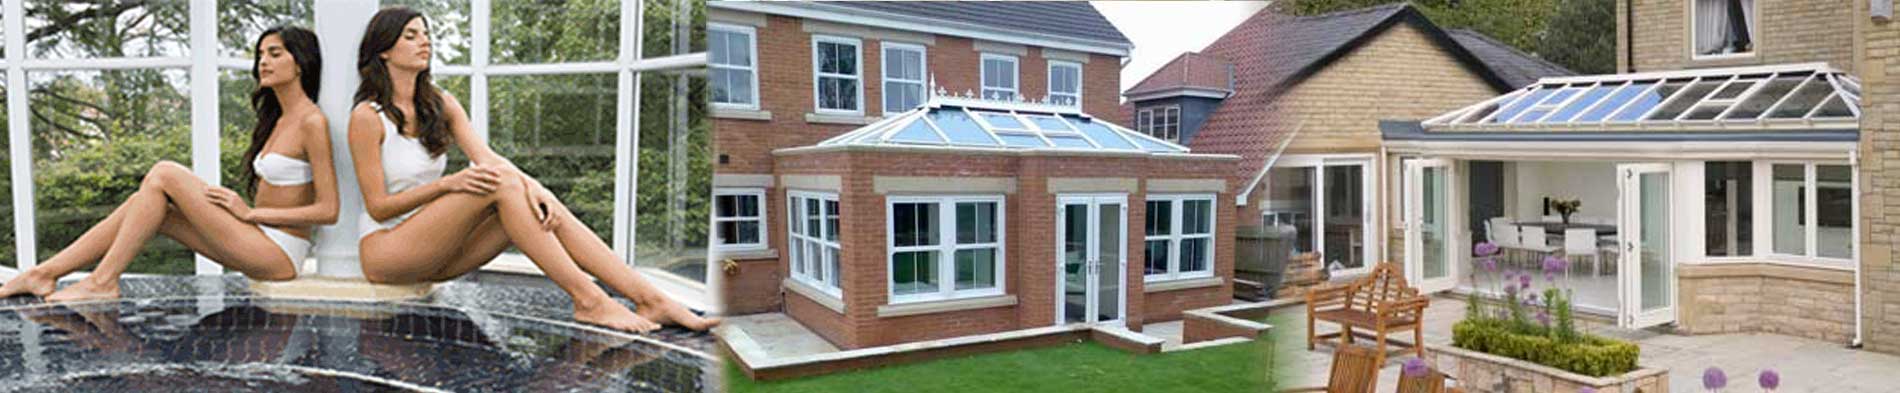 Orangery Conservatories in High Wycombe